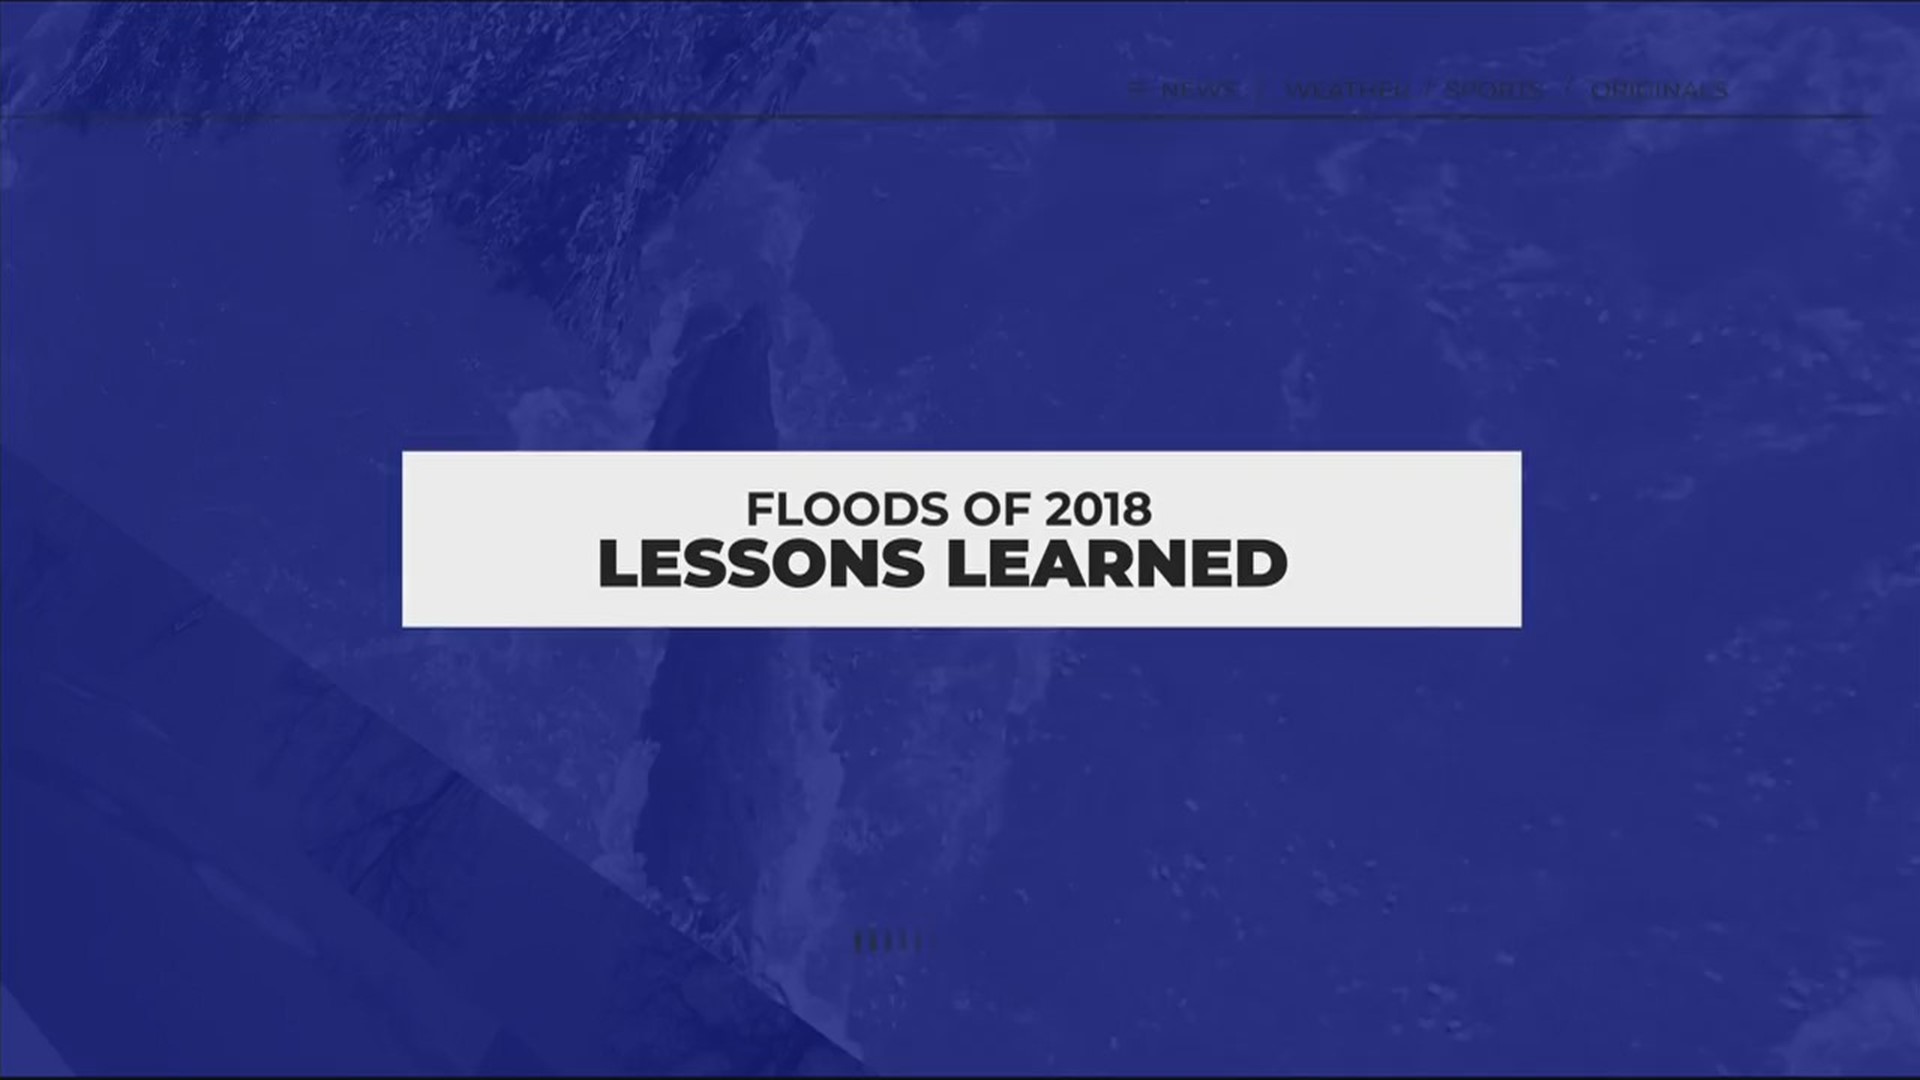 On the night of June 30, 2018, severe flash flooding hit central Iowa.